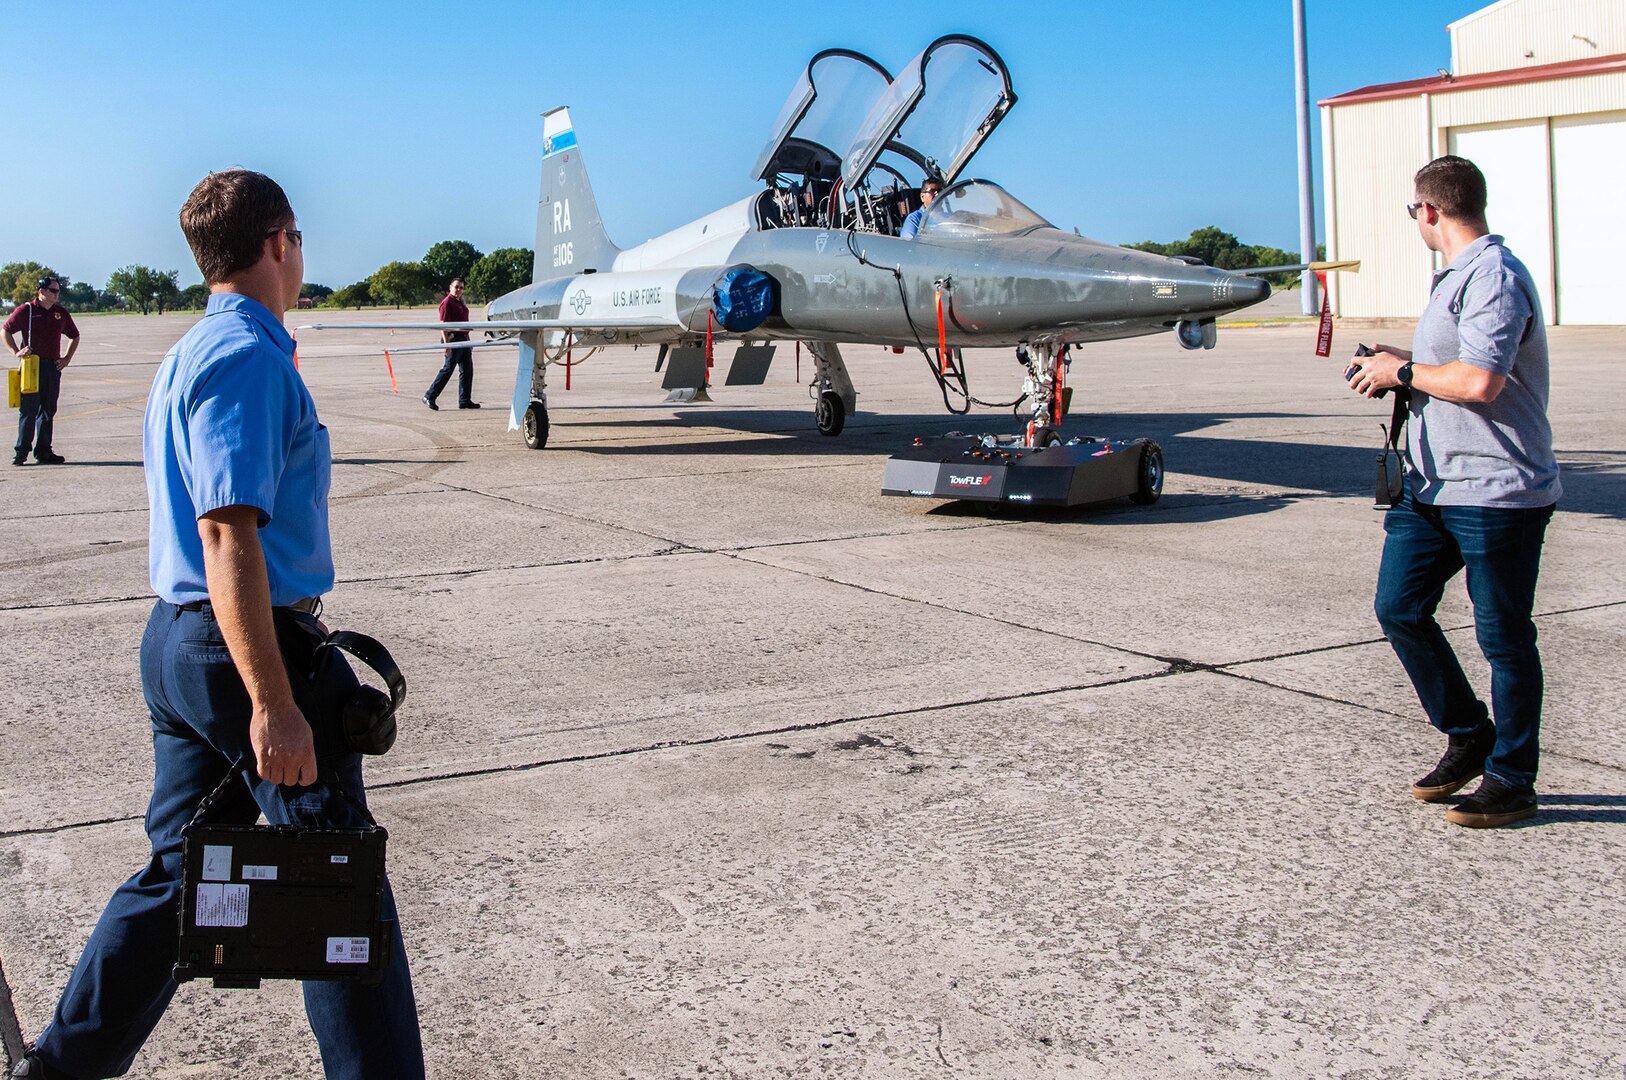 Members from the 12th Maintenance Group conduct a towing stress test on a T-38 aircraft August 27, 2020 at Joint Base San Antonio-Randolph. The remotely controlled aircraft towing system will reduce manpower requirements, allow close quarter towing and quicker aircraft stowing ahead of inclement weather.